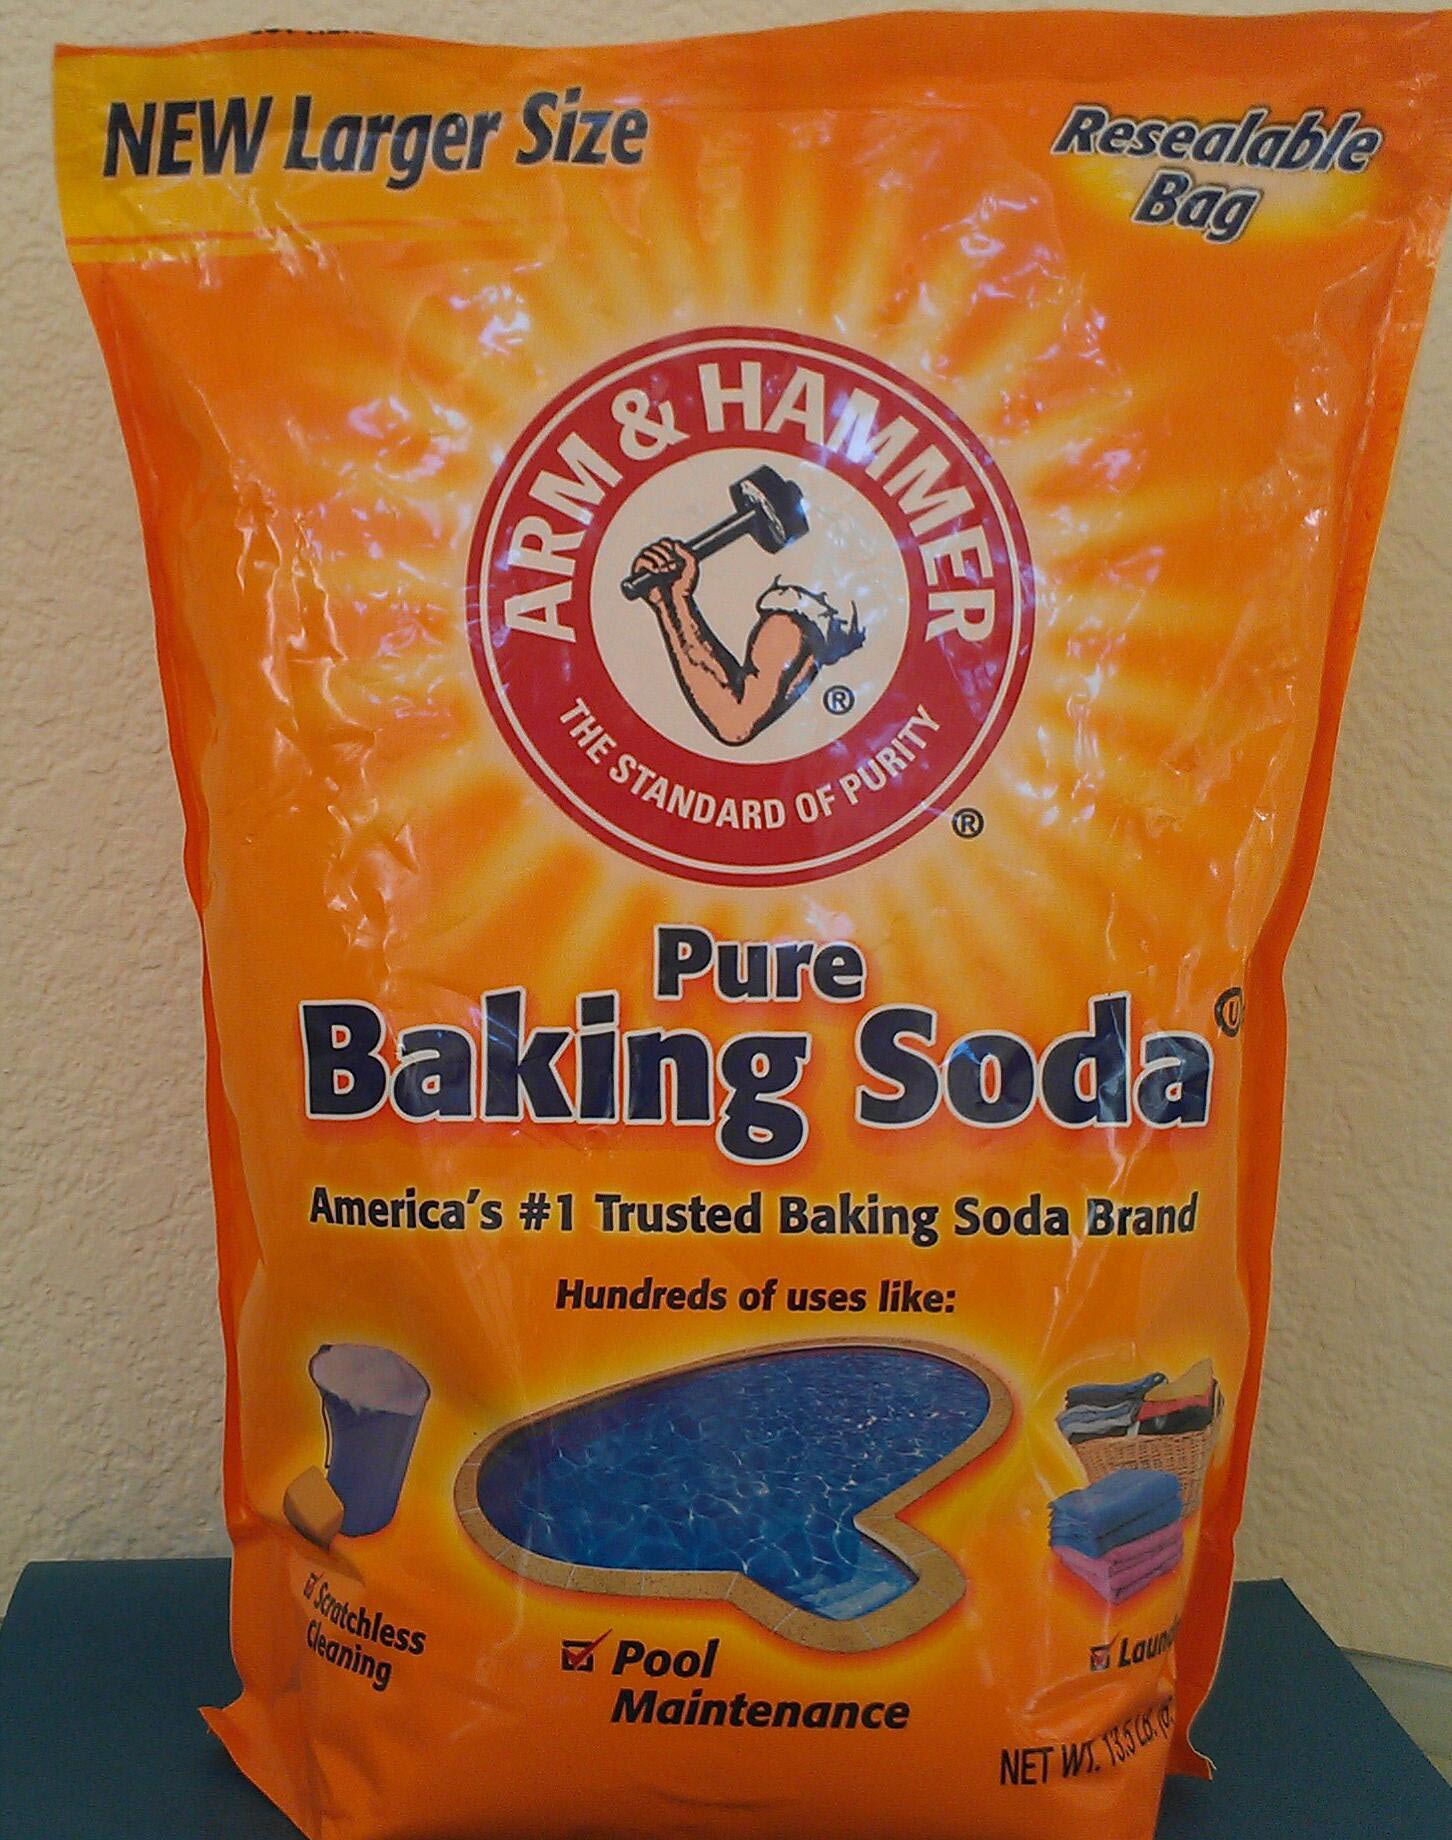 5 Green Cleaning Products You Can Make with Baking Soda